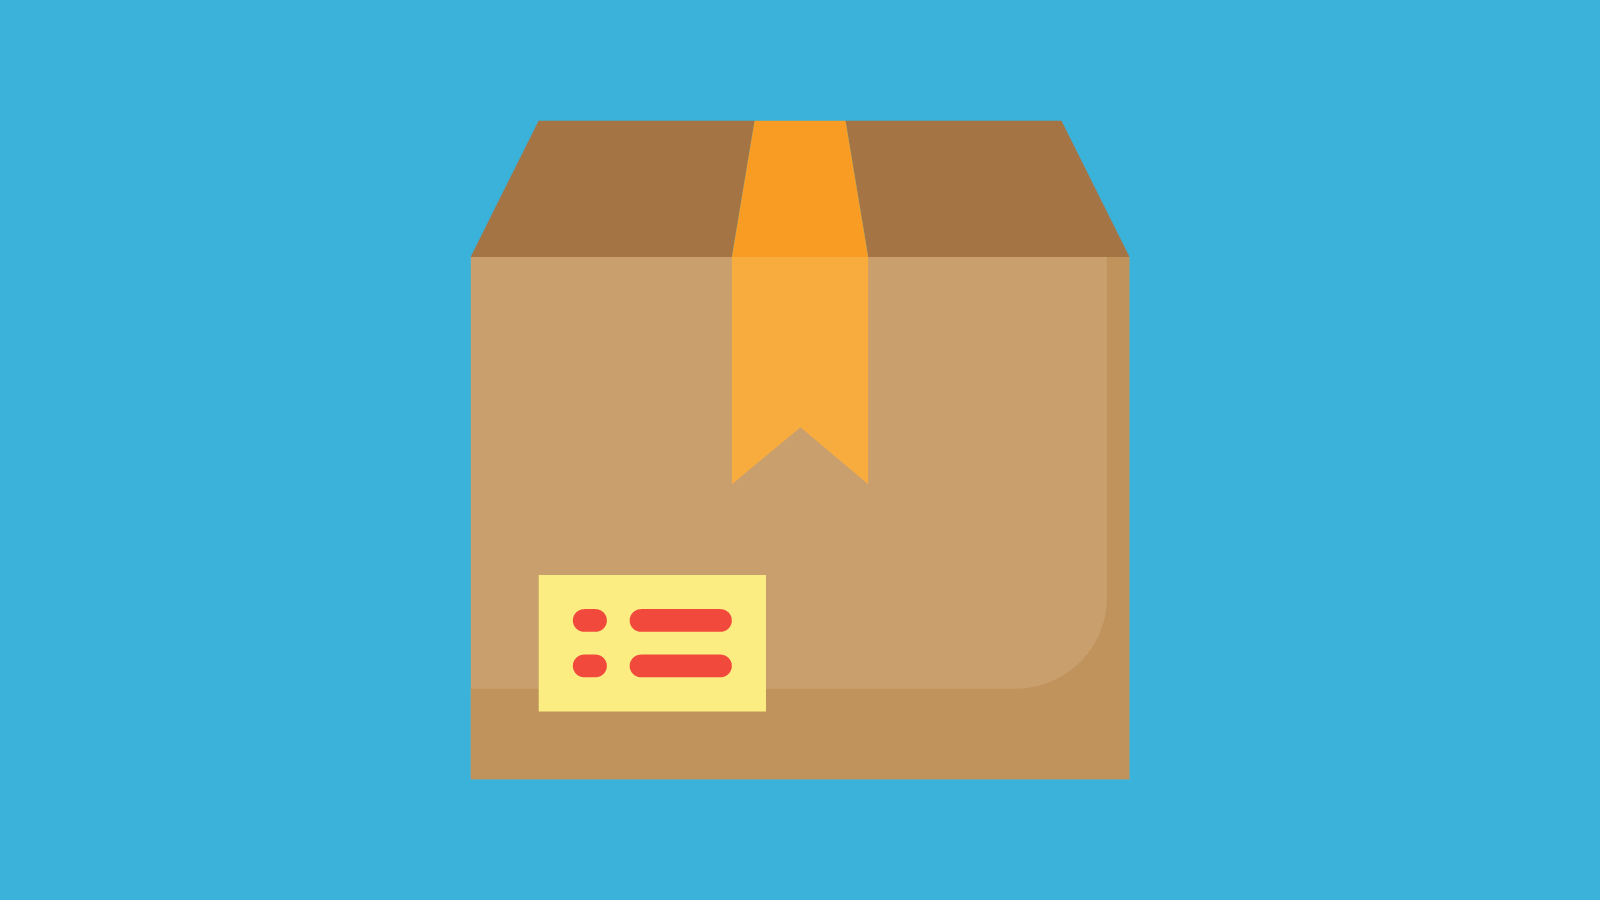 An illustration of a shipping box